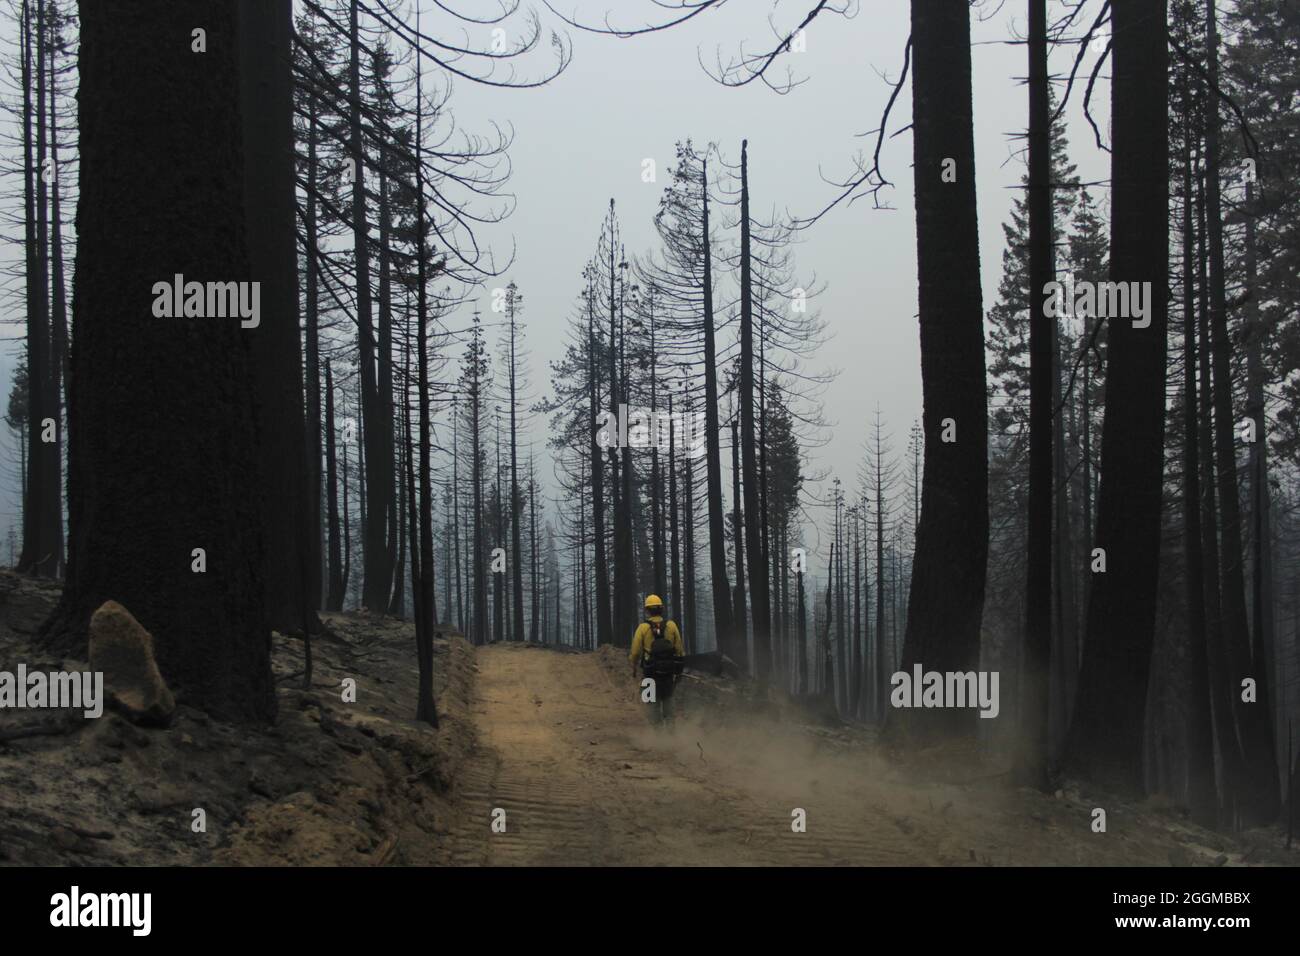 Firefighter Hiking Through Burned Area Surrounded by Snags   The Dixie Fire is a wildfire that burned Greenville, California to the ground and has burned 844,082 acres by the end of August, 2021 in California’s Butte, Plumas and Tehama Counties. The fire, which began July 13, 2021, is the largest single recorded fire complex in California history. Drought conditions in California have made the 2021 fire season extreme. Stock Photo